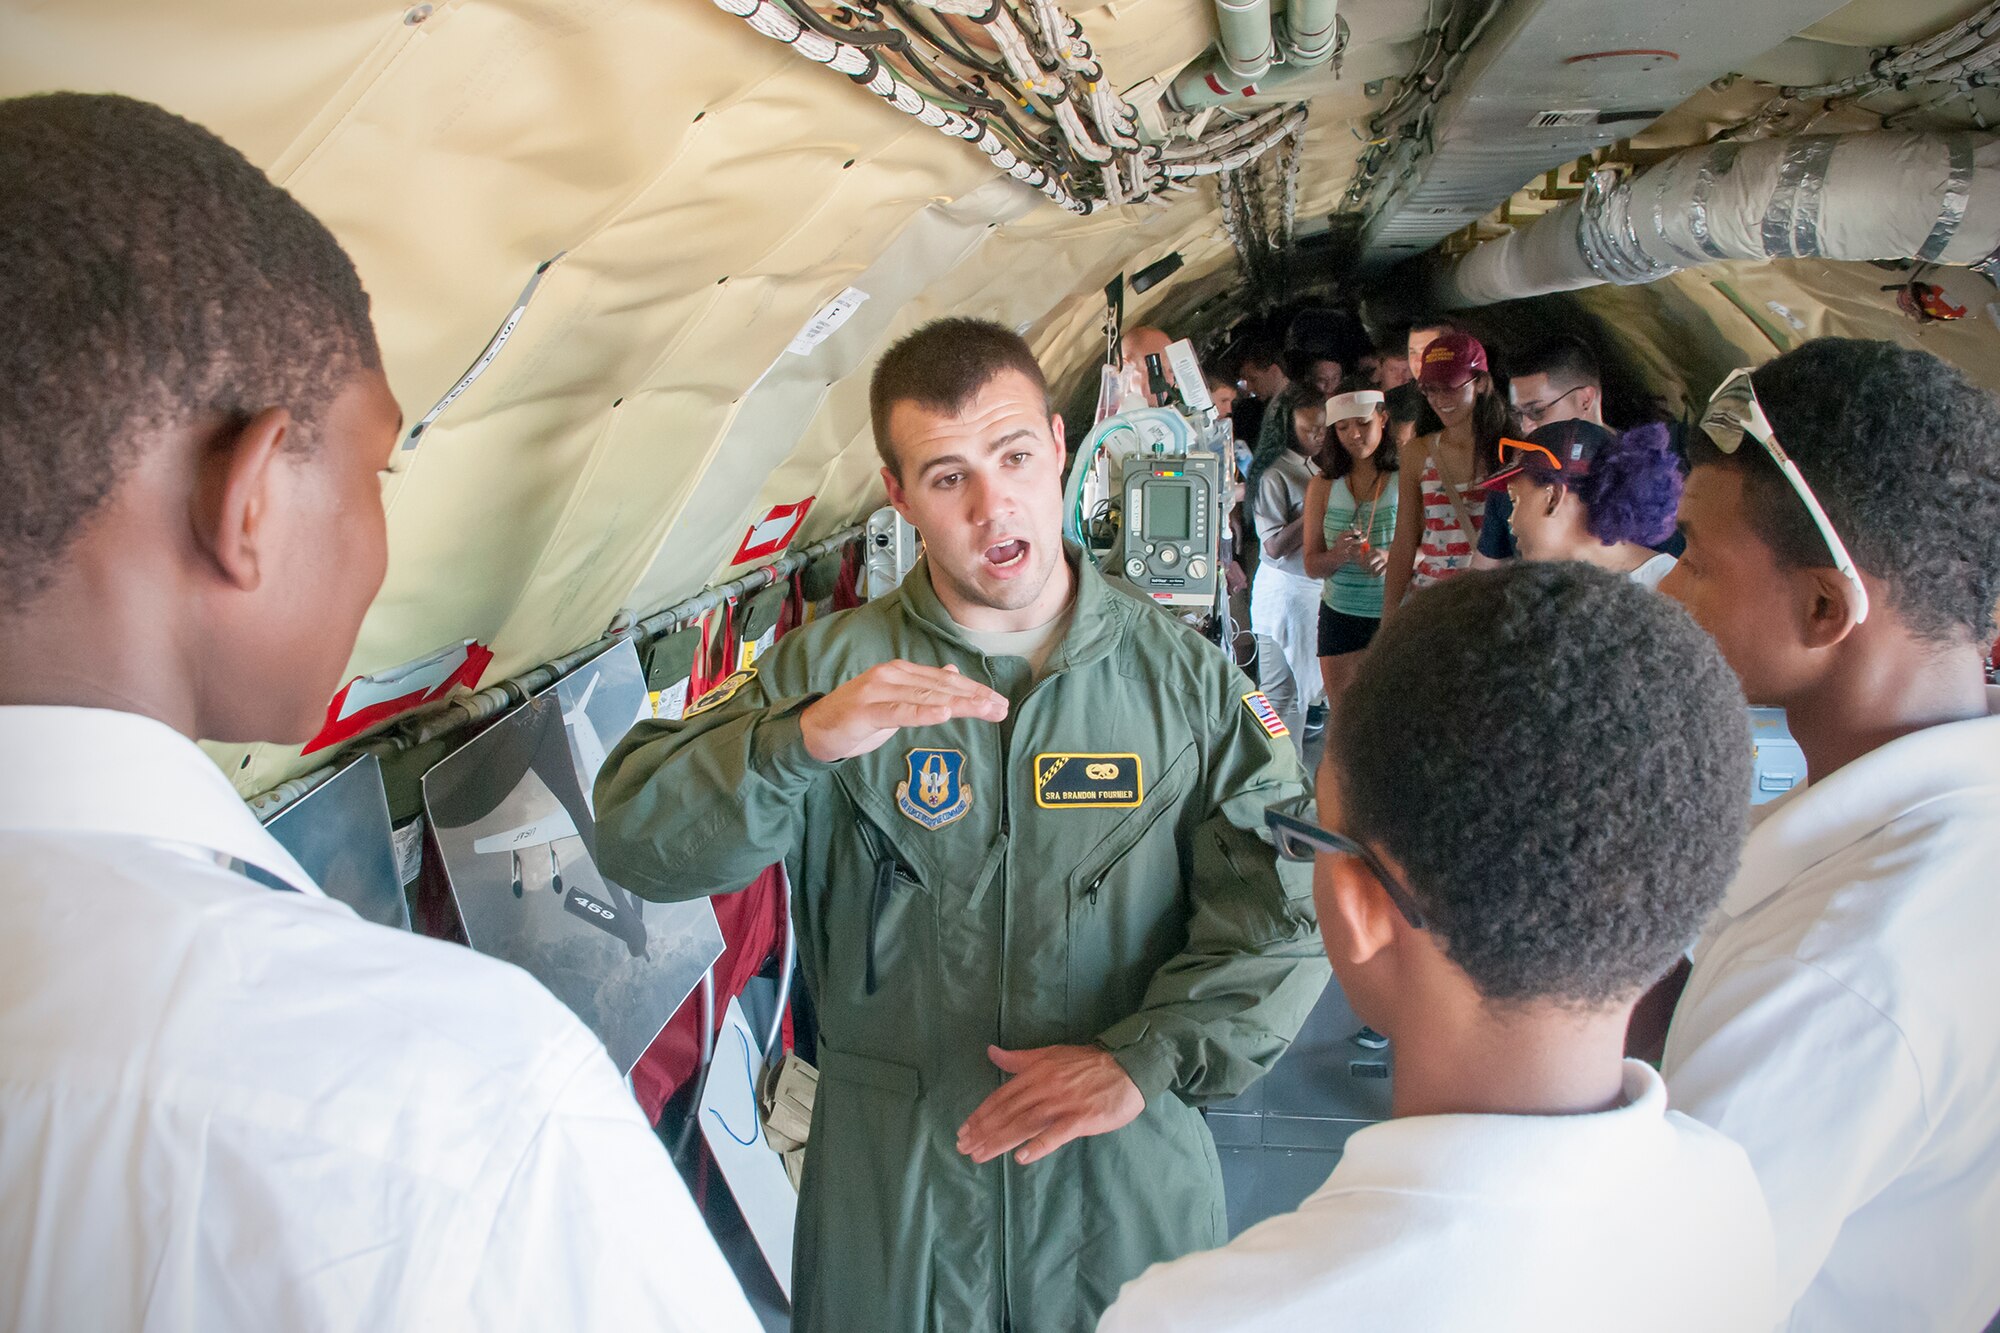 Senior Airman Brandon Fournier, 459th Maintenance Group crew chief, talks about the inflight refueling capabilities of the KC-135R Sratotanker to a group of students at the Joint Base Andrews Air Show Sept. 18, 2015. The 459th Airlift Wing provided tours of the aircraft and illustrated medical and refueling capabilities to the public during the open house. (U.S. Air Force photo/Staff Sgt. Kat Justen)